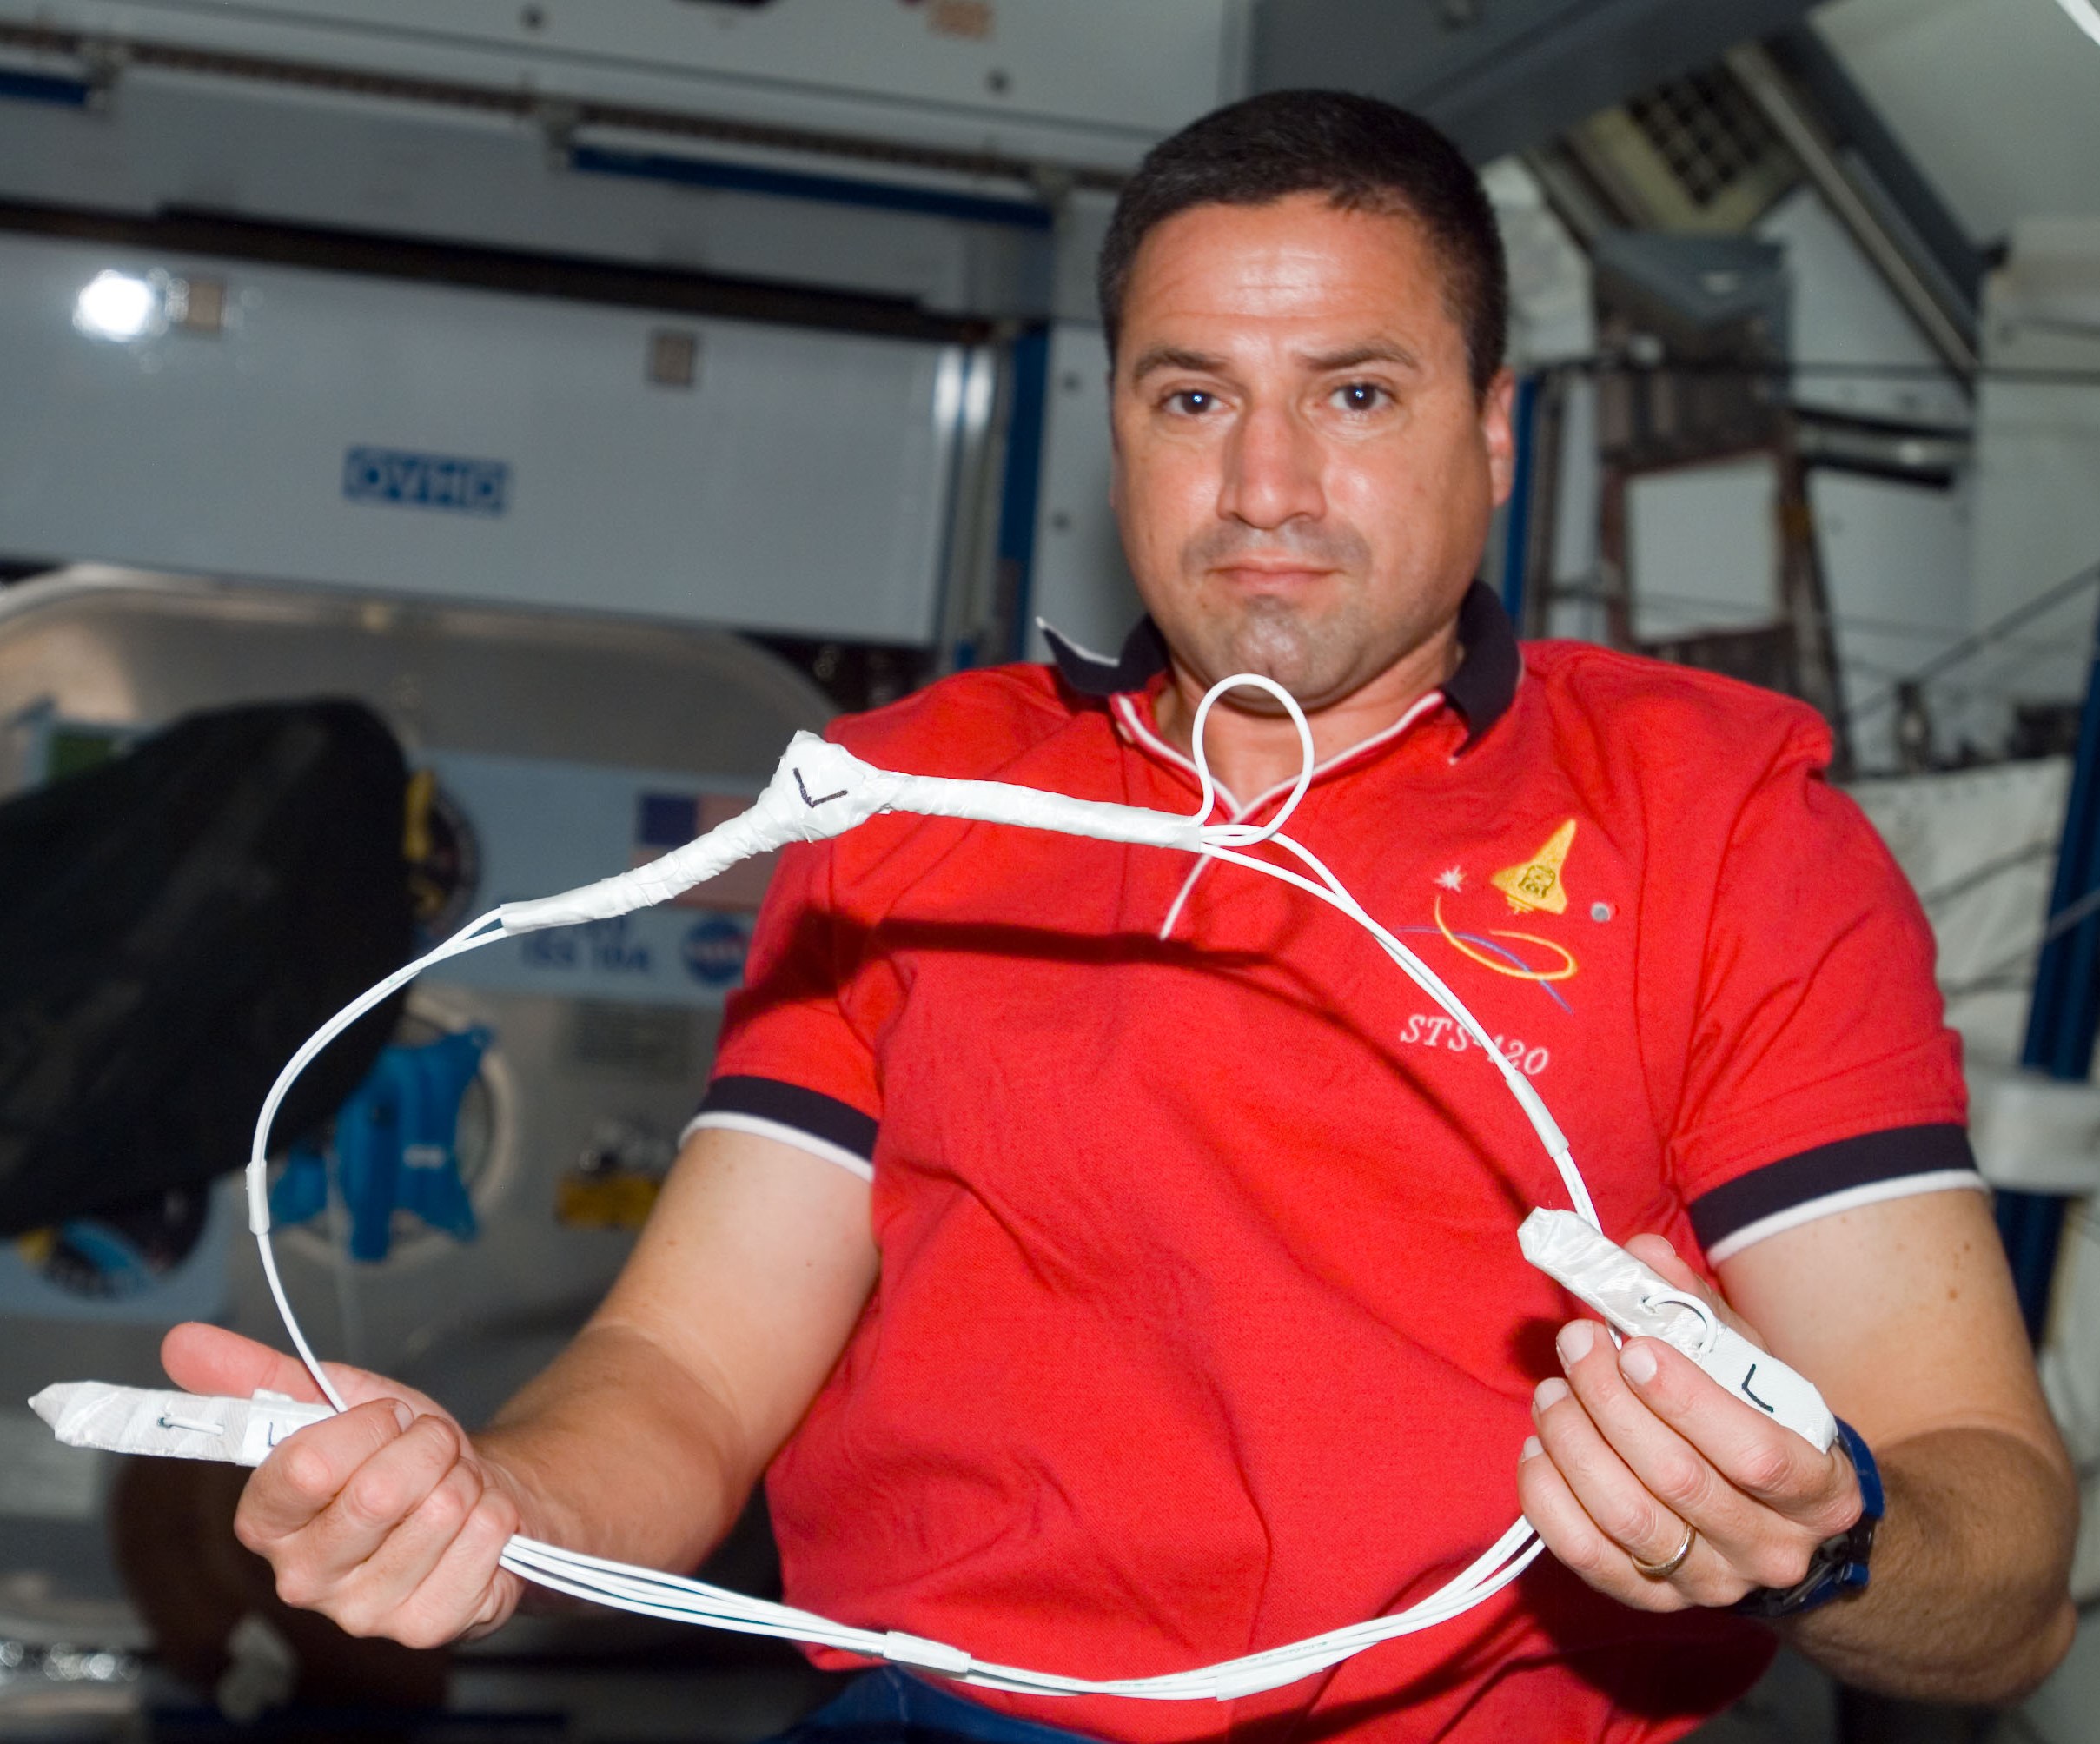 NASA astronaut George D. Zamka holding the cufflink device used to repair the torn solar array